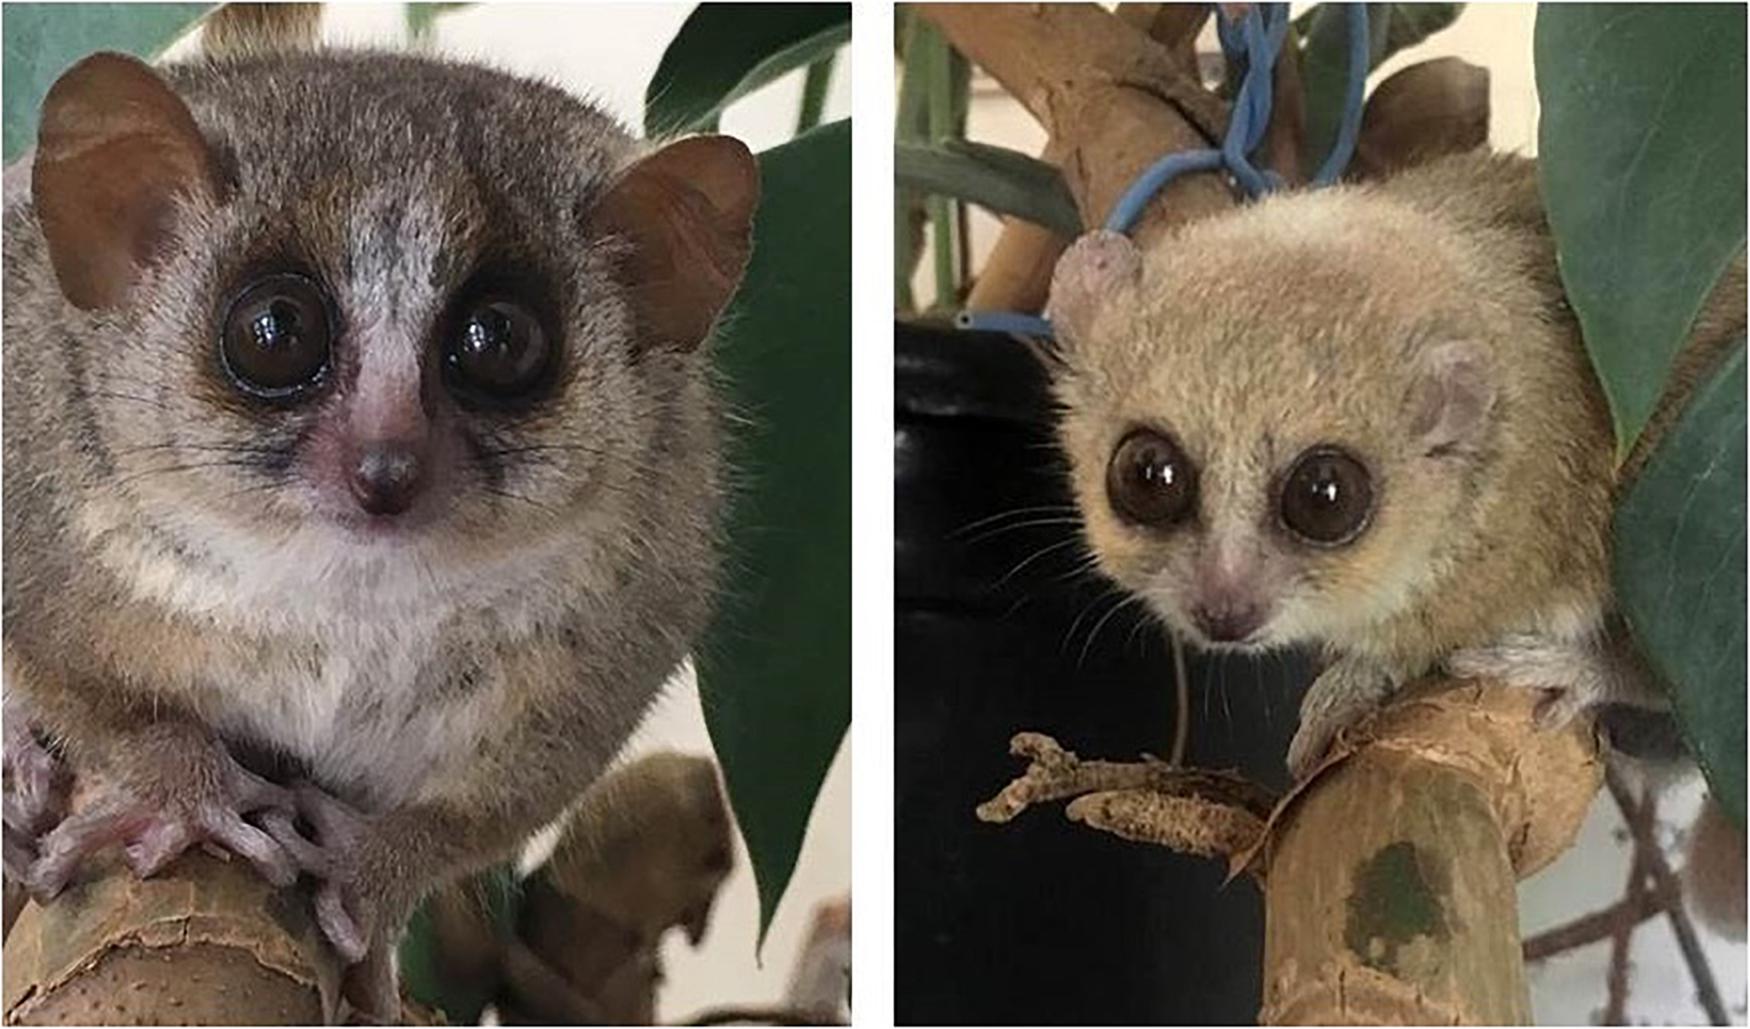 Frontiers The Biological Clock In Gray Mouse Lemur Adaptive Evolutionary And Aging Considerations In An Emerging Non Human Primate Model Physiology